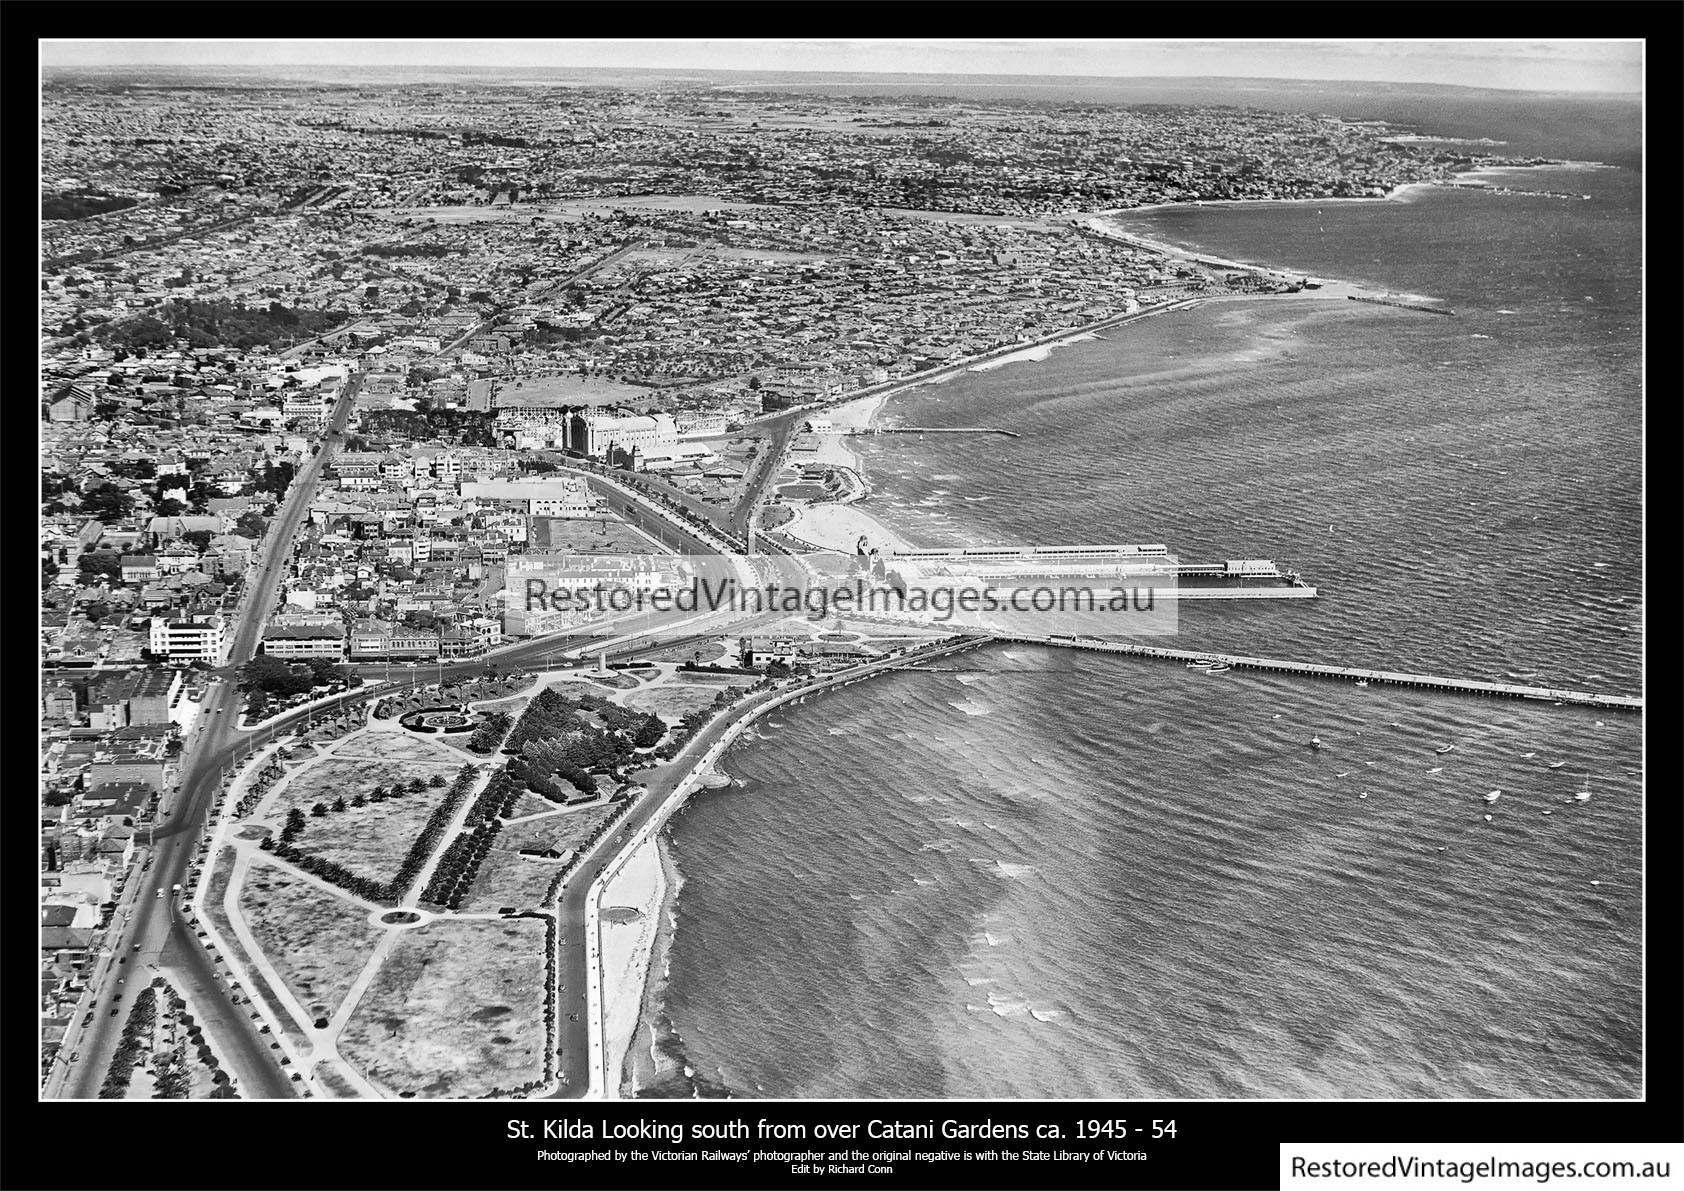 St KIlda Aerial Looking South From Above Catani Gardens 1945-1954